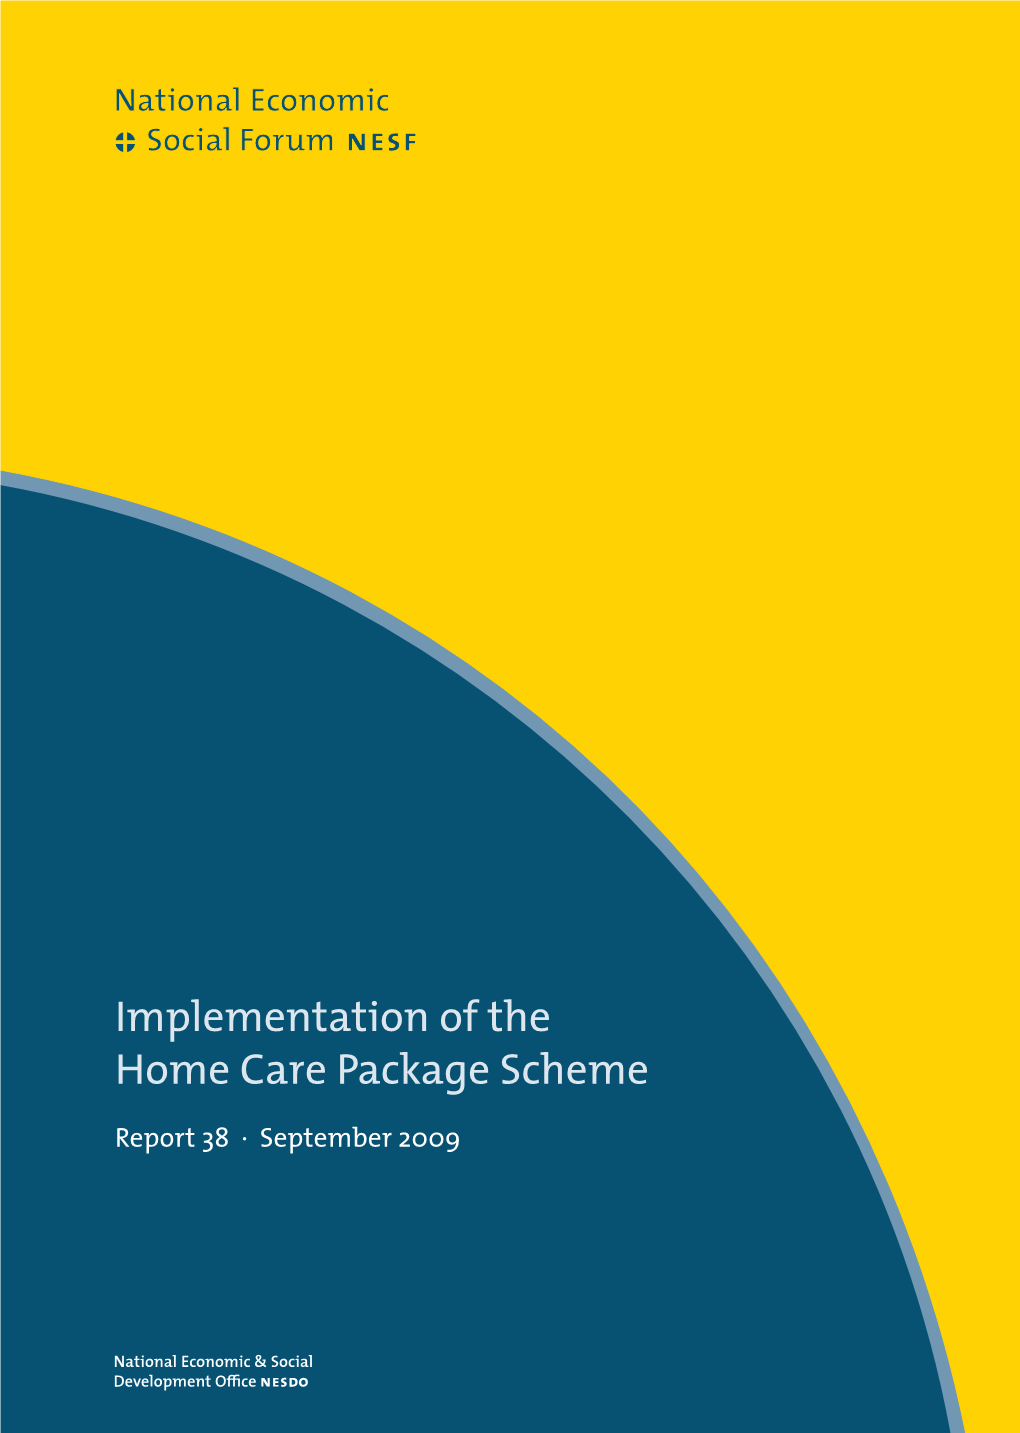 Implementation of the Home Care Package Scheme